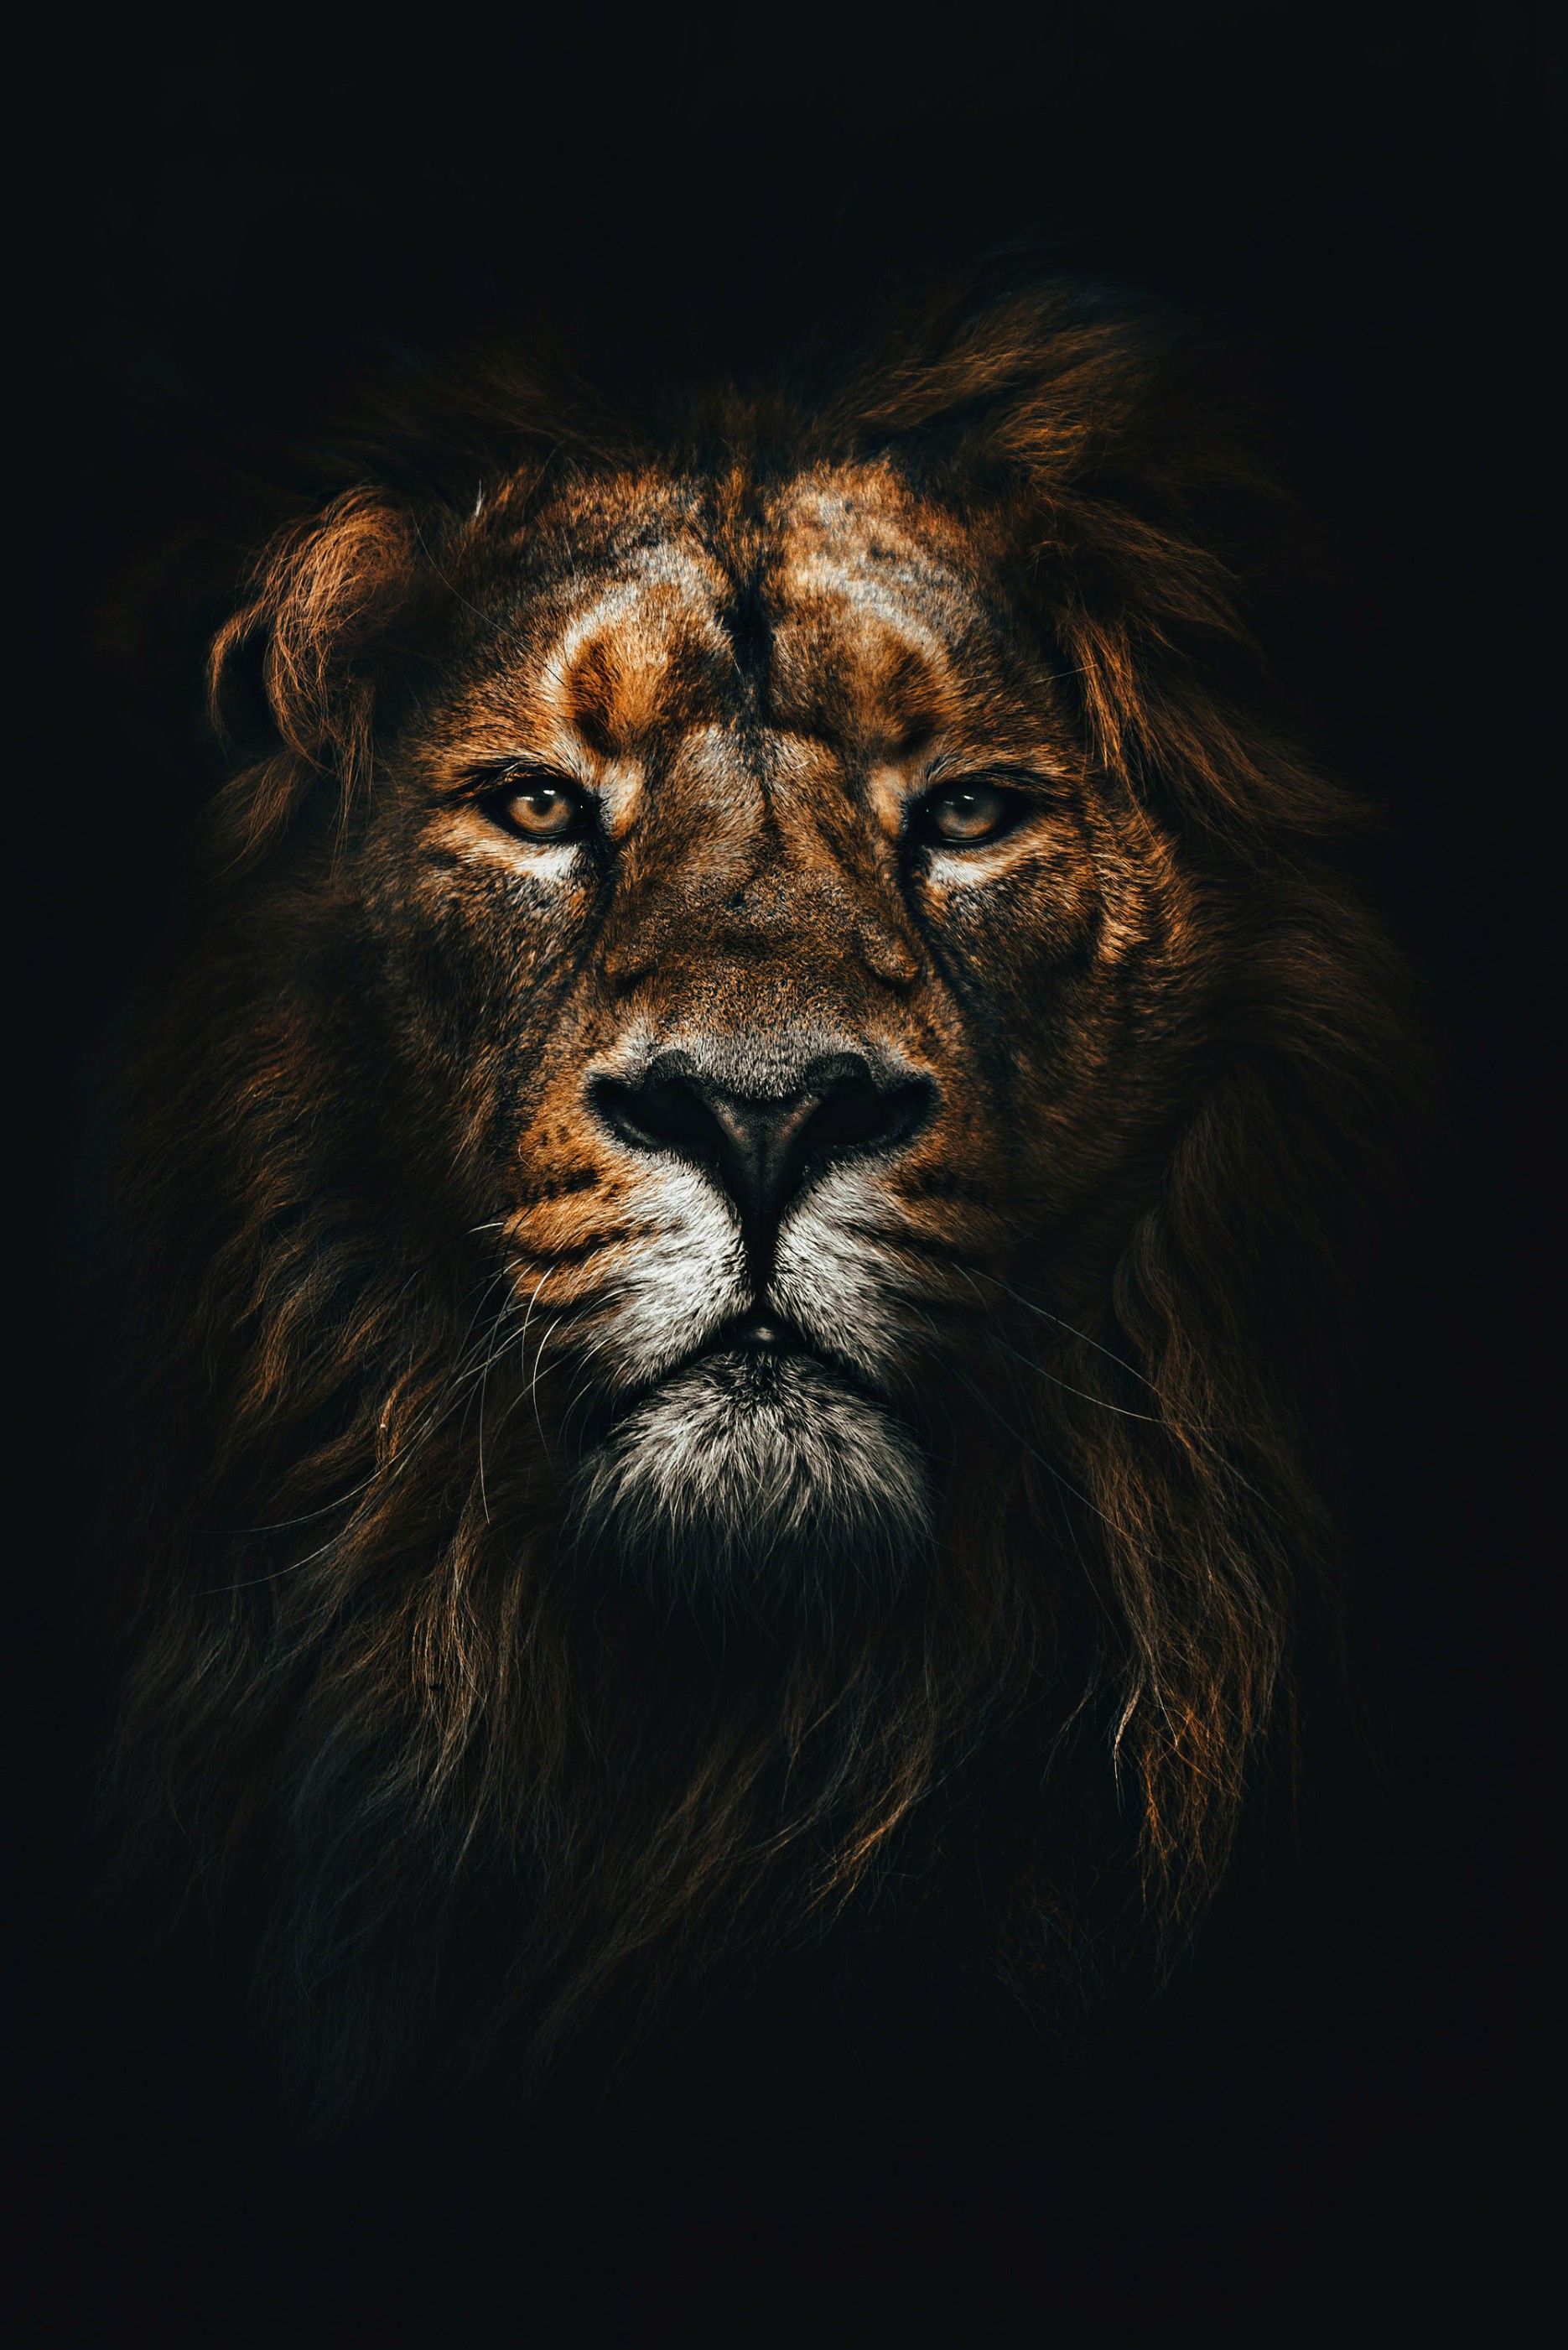 Lion Crown IPhone Wallpaper HD  IPhone Wallpapers  iPhone Wallpapers in  2023  Lion hd wallpaper Iphone wallpaper hd nature Lion wallpaper iphone